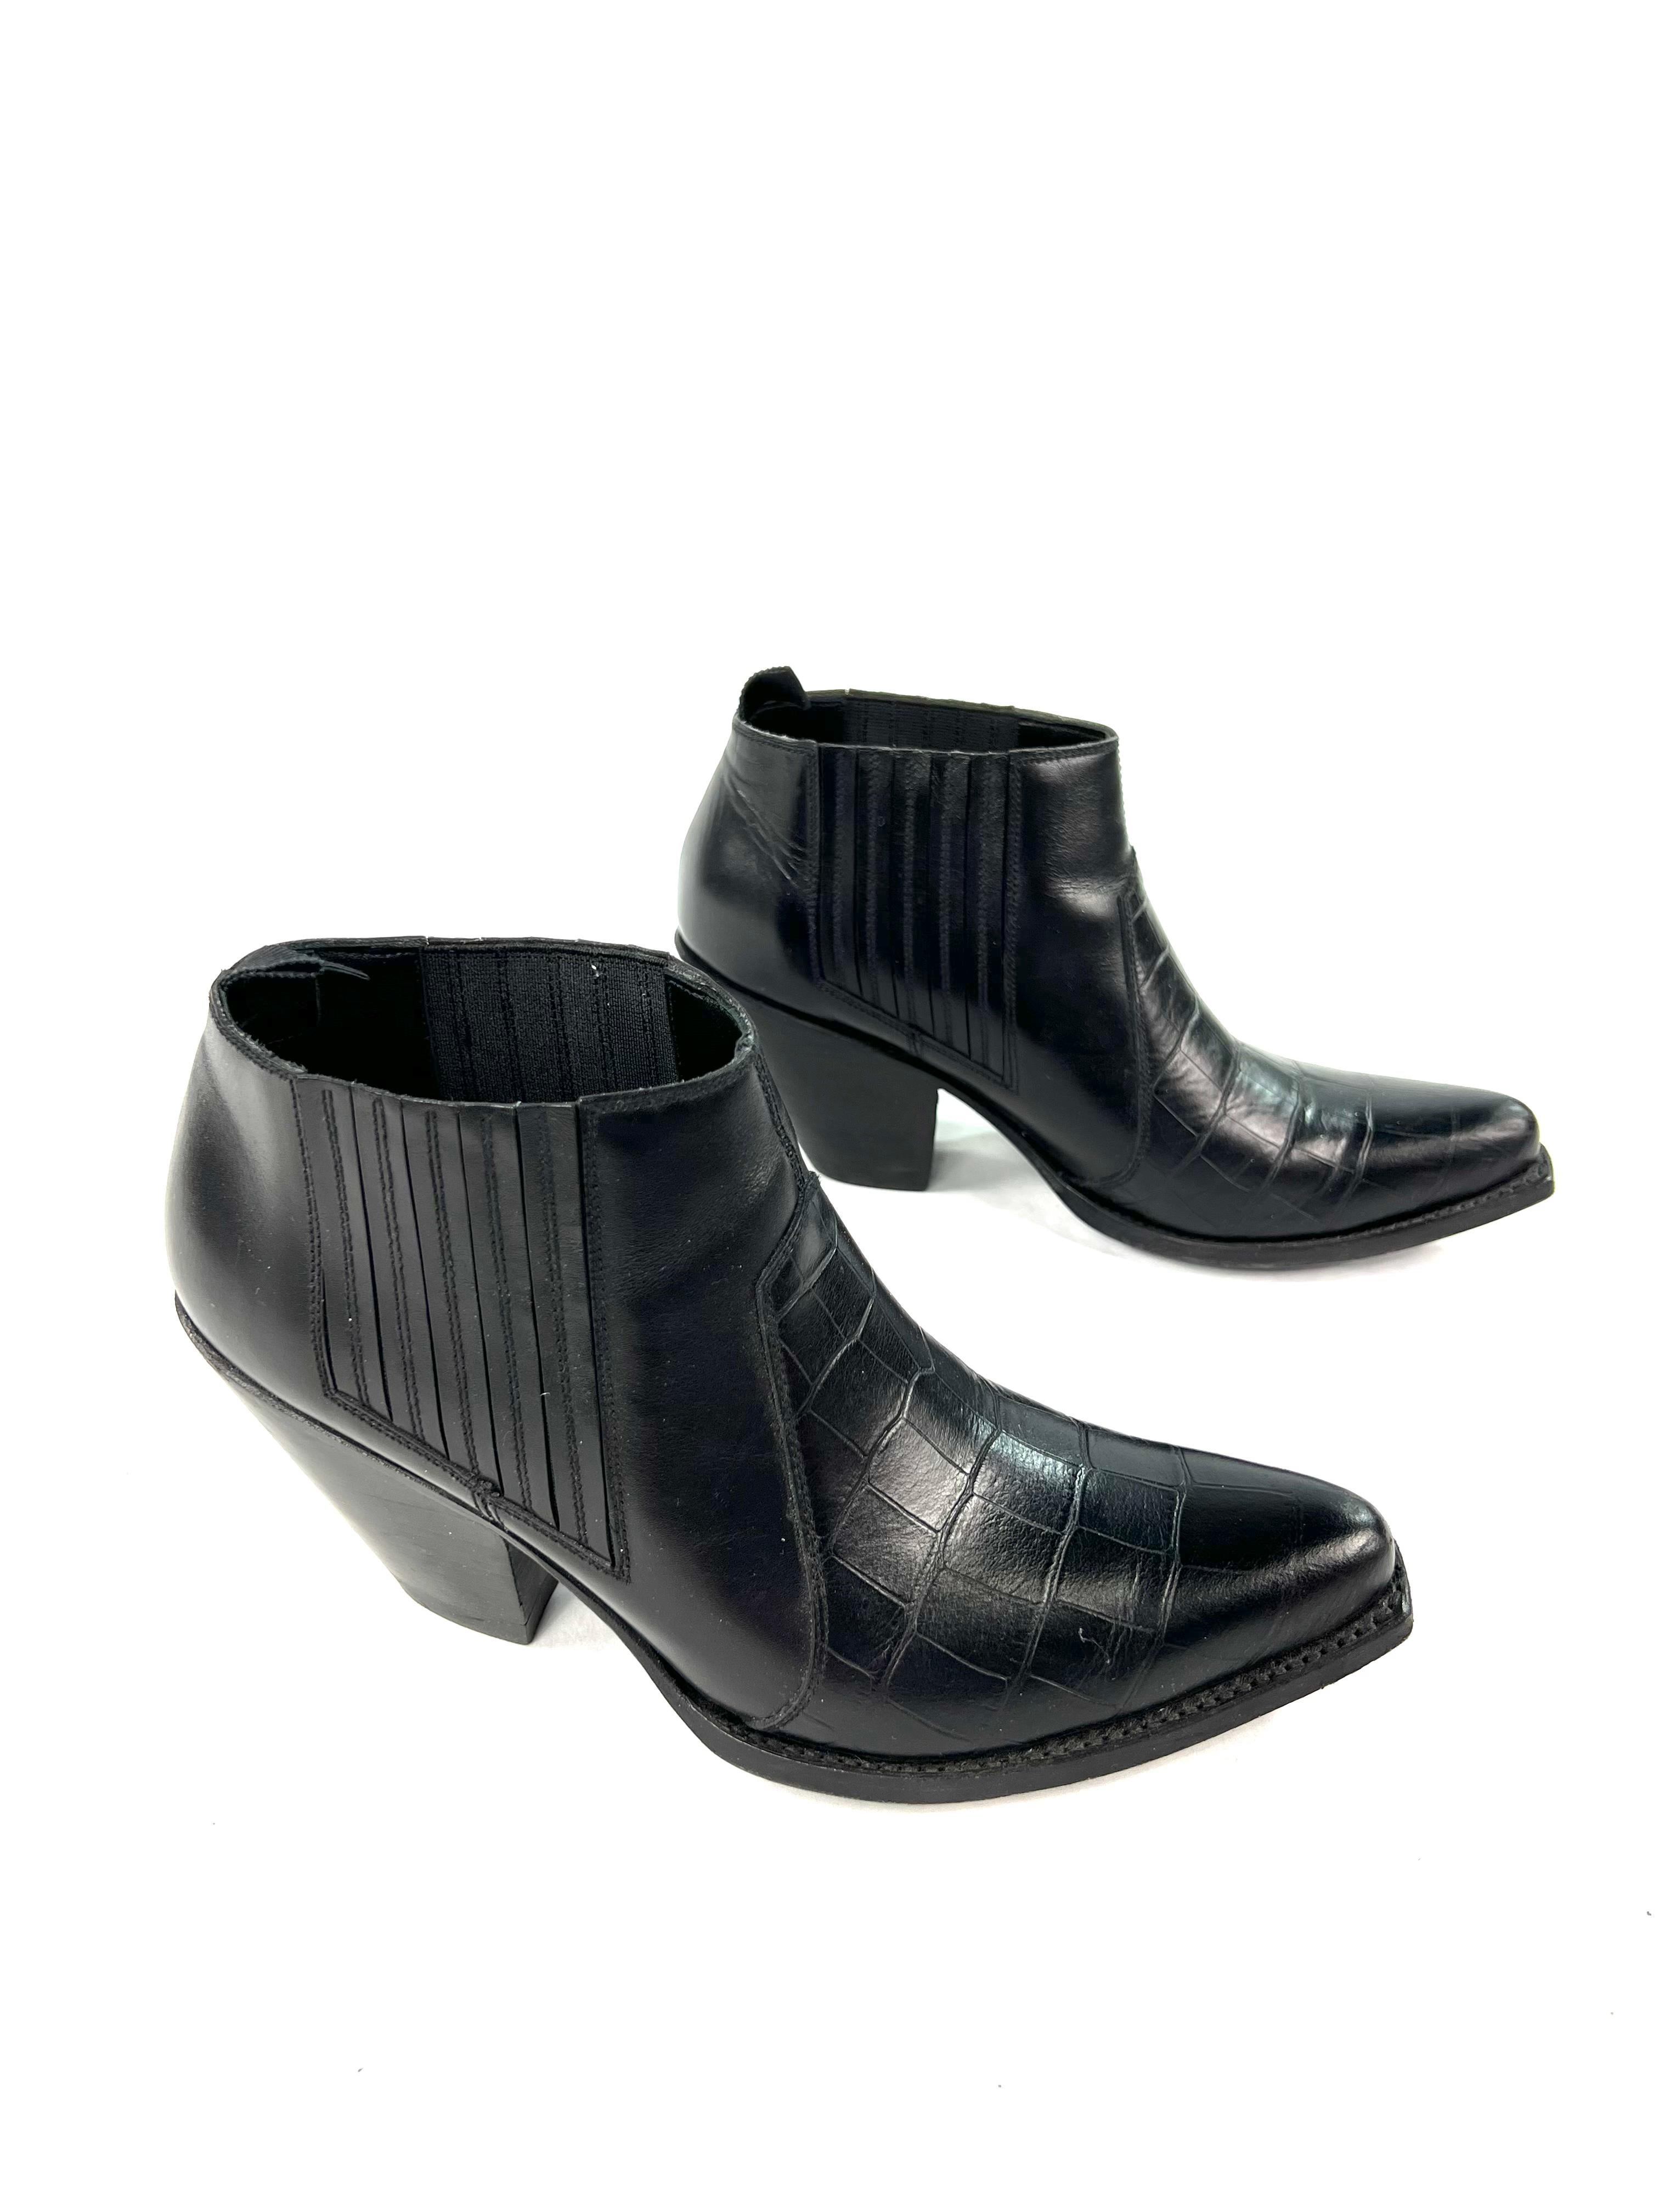 Celine Black Leather Bootie, Size 38 In Excellent Condition For Sale In Beverly Hills, CA